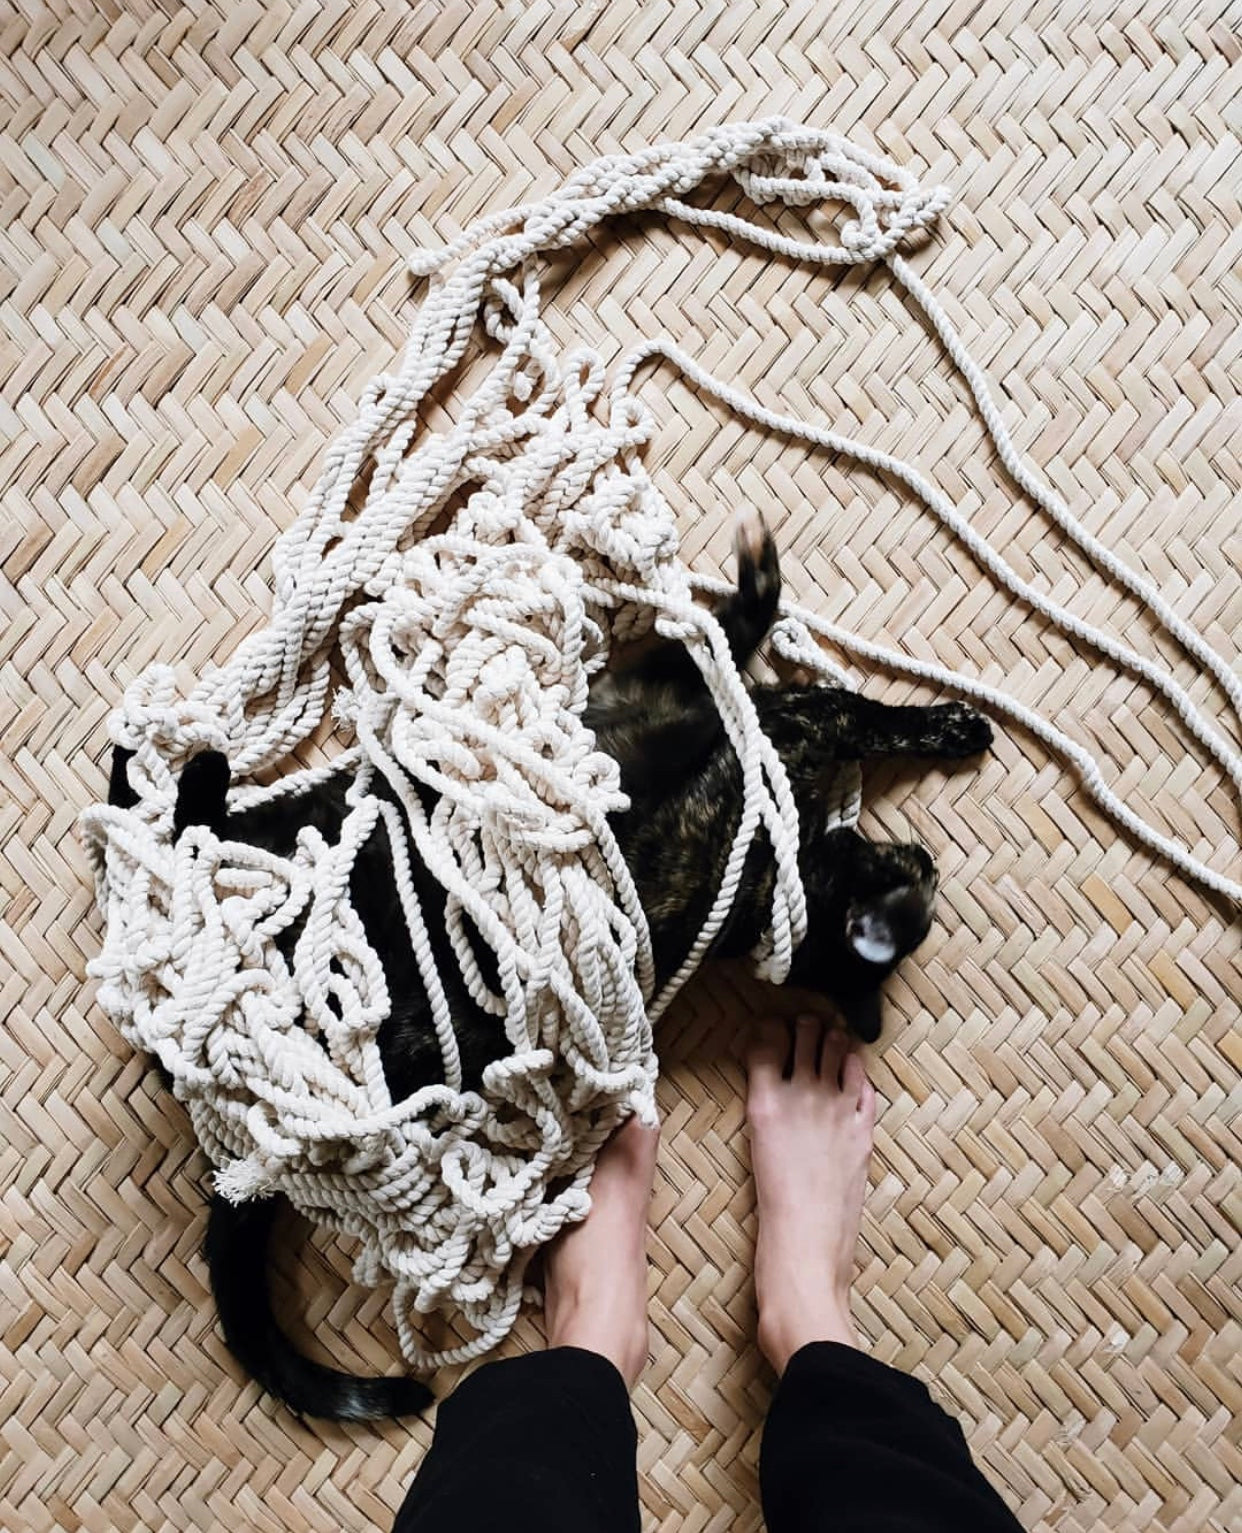 Black cat all tangled up in macramé rope